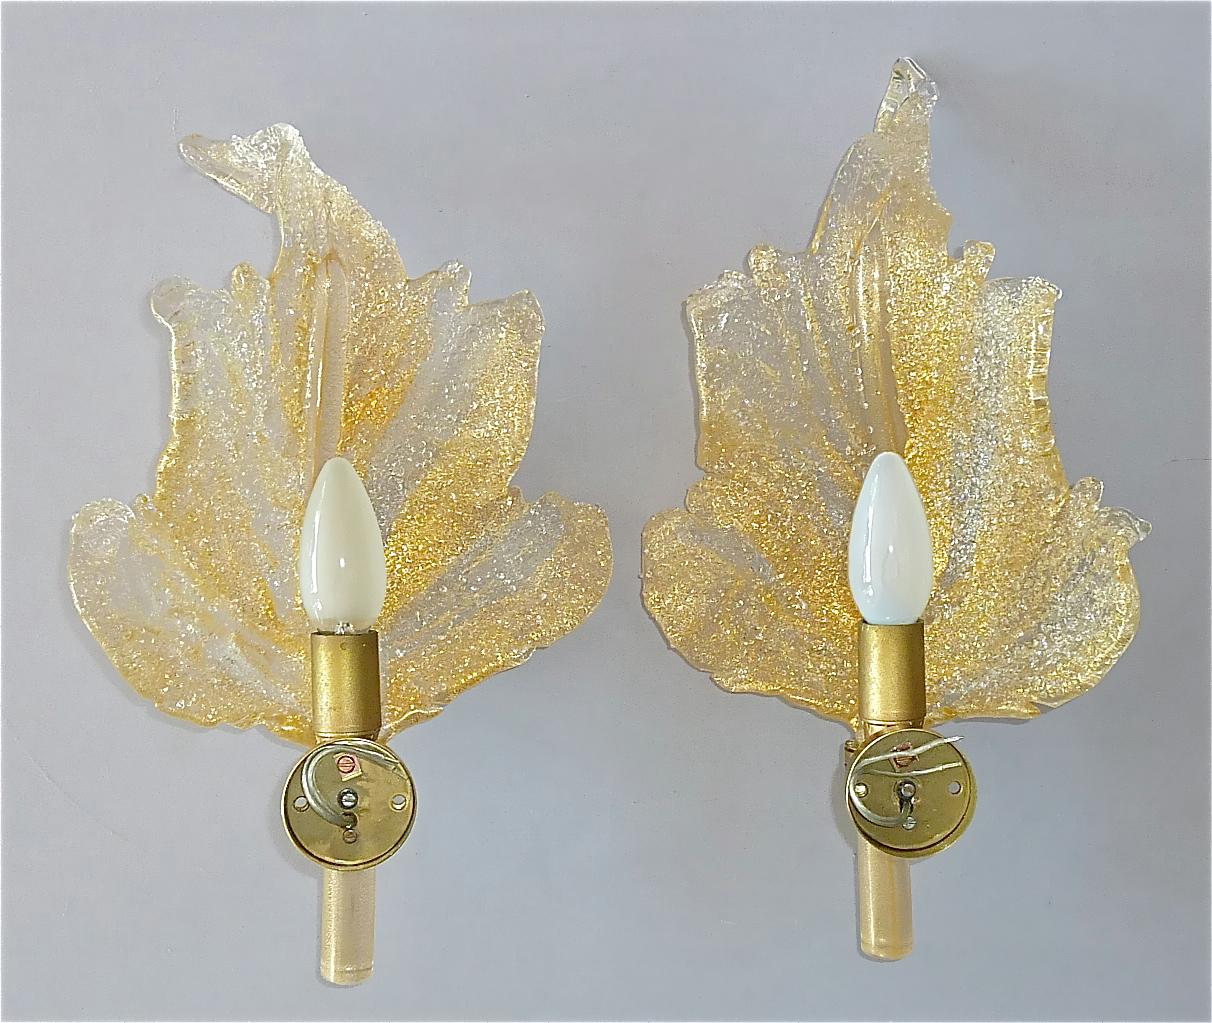 Large Signed Pair Barovier & Toso Leaf Sconces Italian Murano Glass Floral 1970s For Sale 7